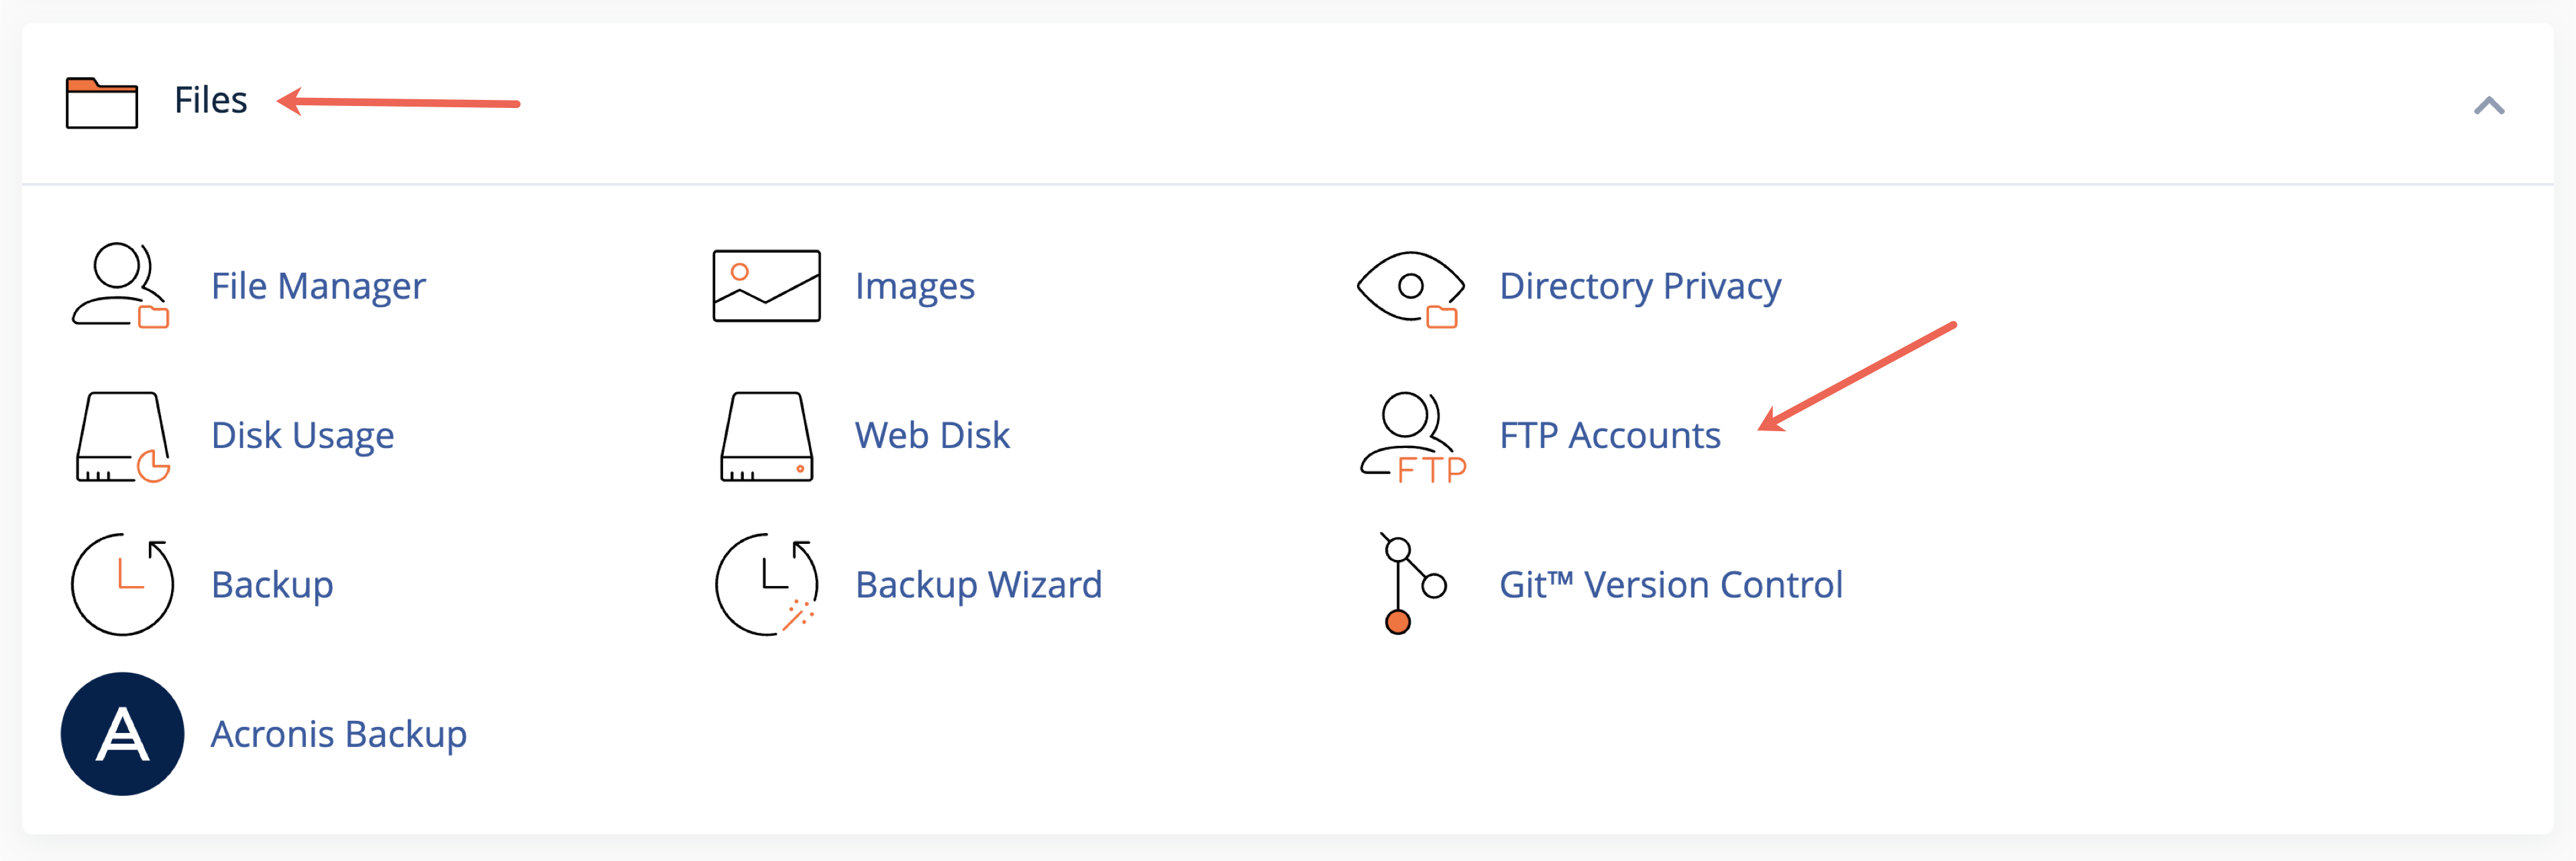 Figure 3: cPanel Dashboard Screen ‘Files’ Section